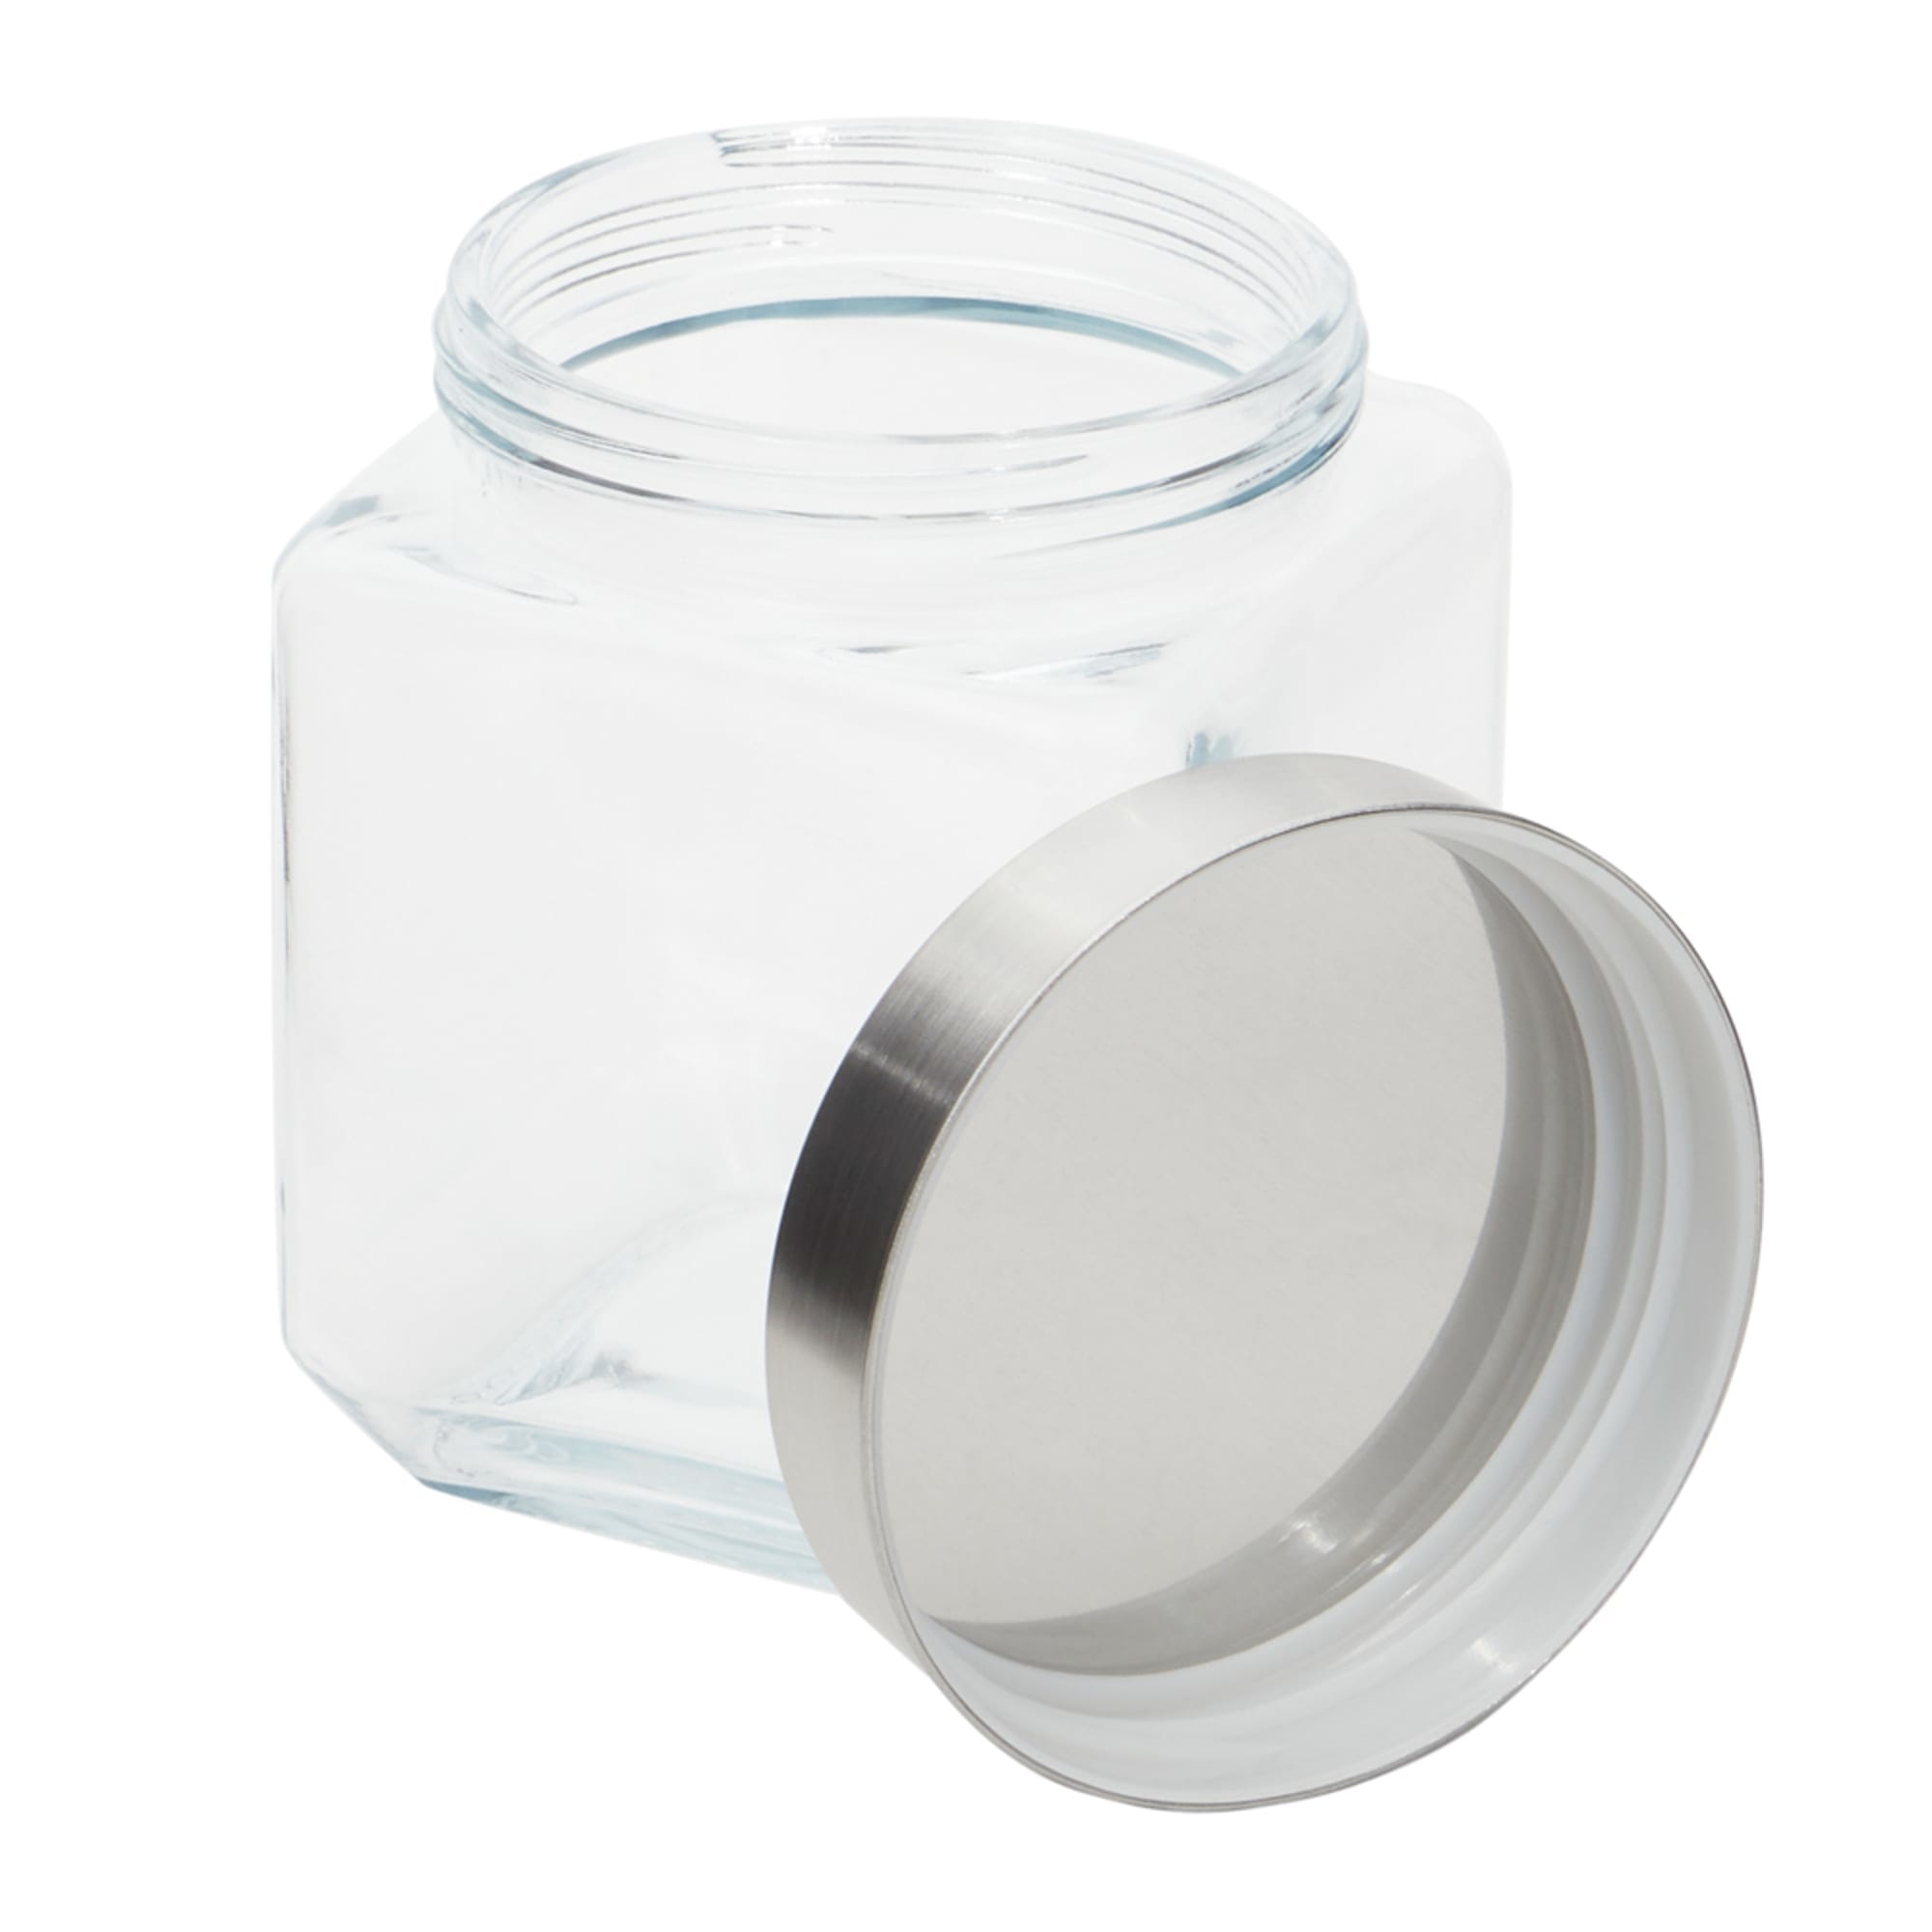 Home Basics 40 oz. Square Glass Canister with Brushed Stainless Steel Screw-on Lid Clear $2.50 EACH, CASE PACK OF 24